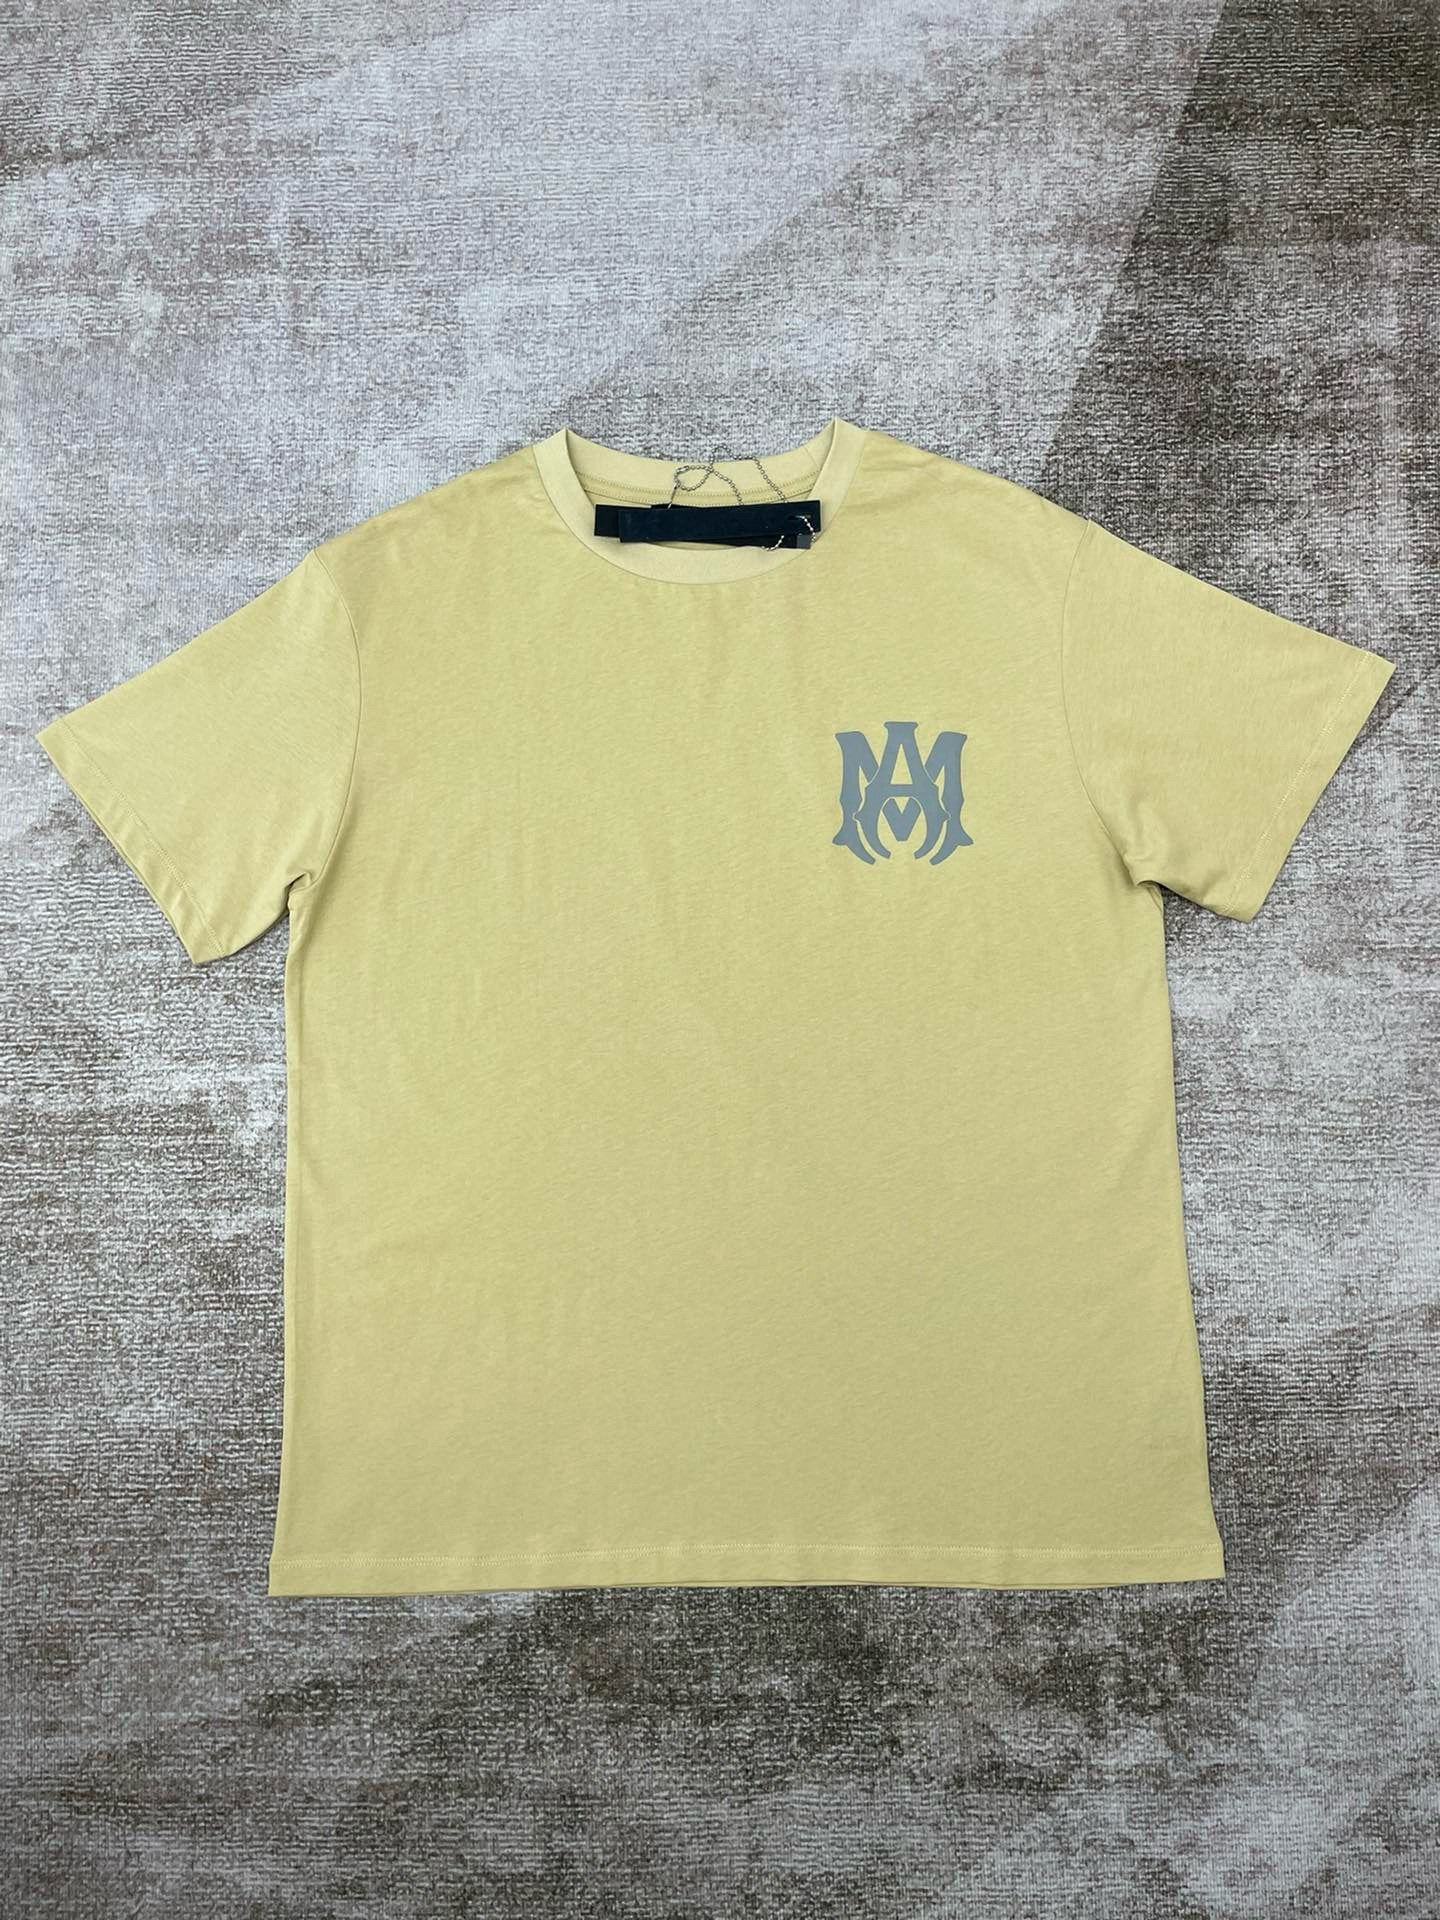 Sky blue, Blue and Yellow T-shirt